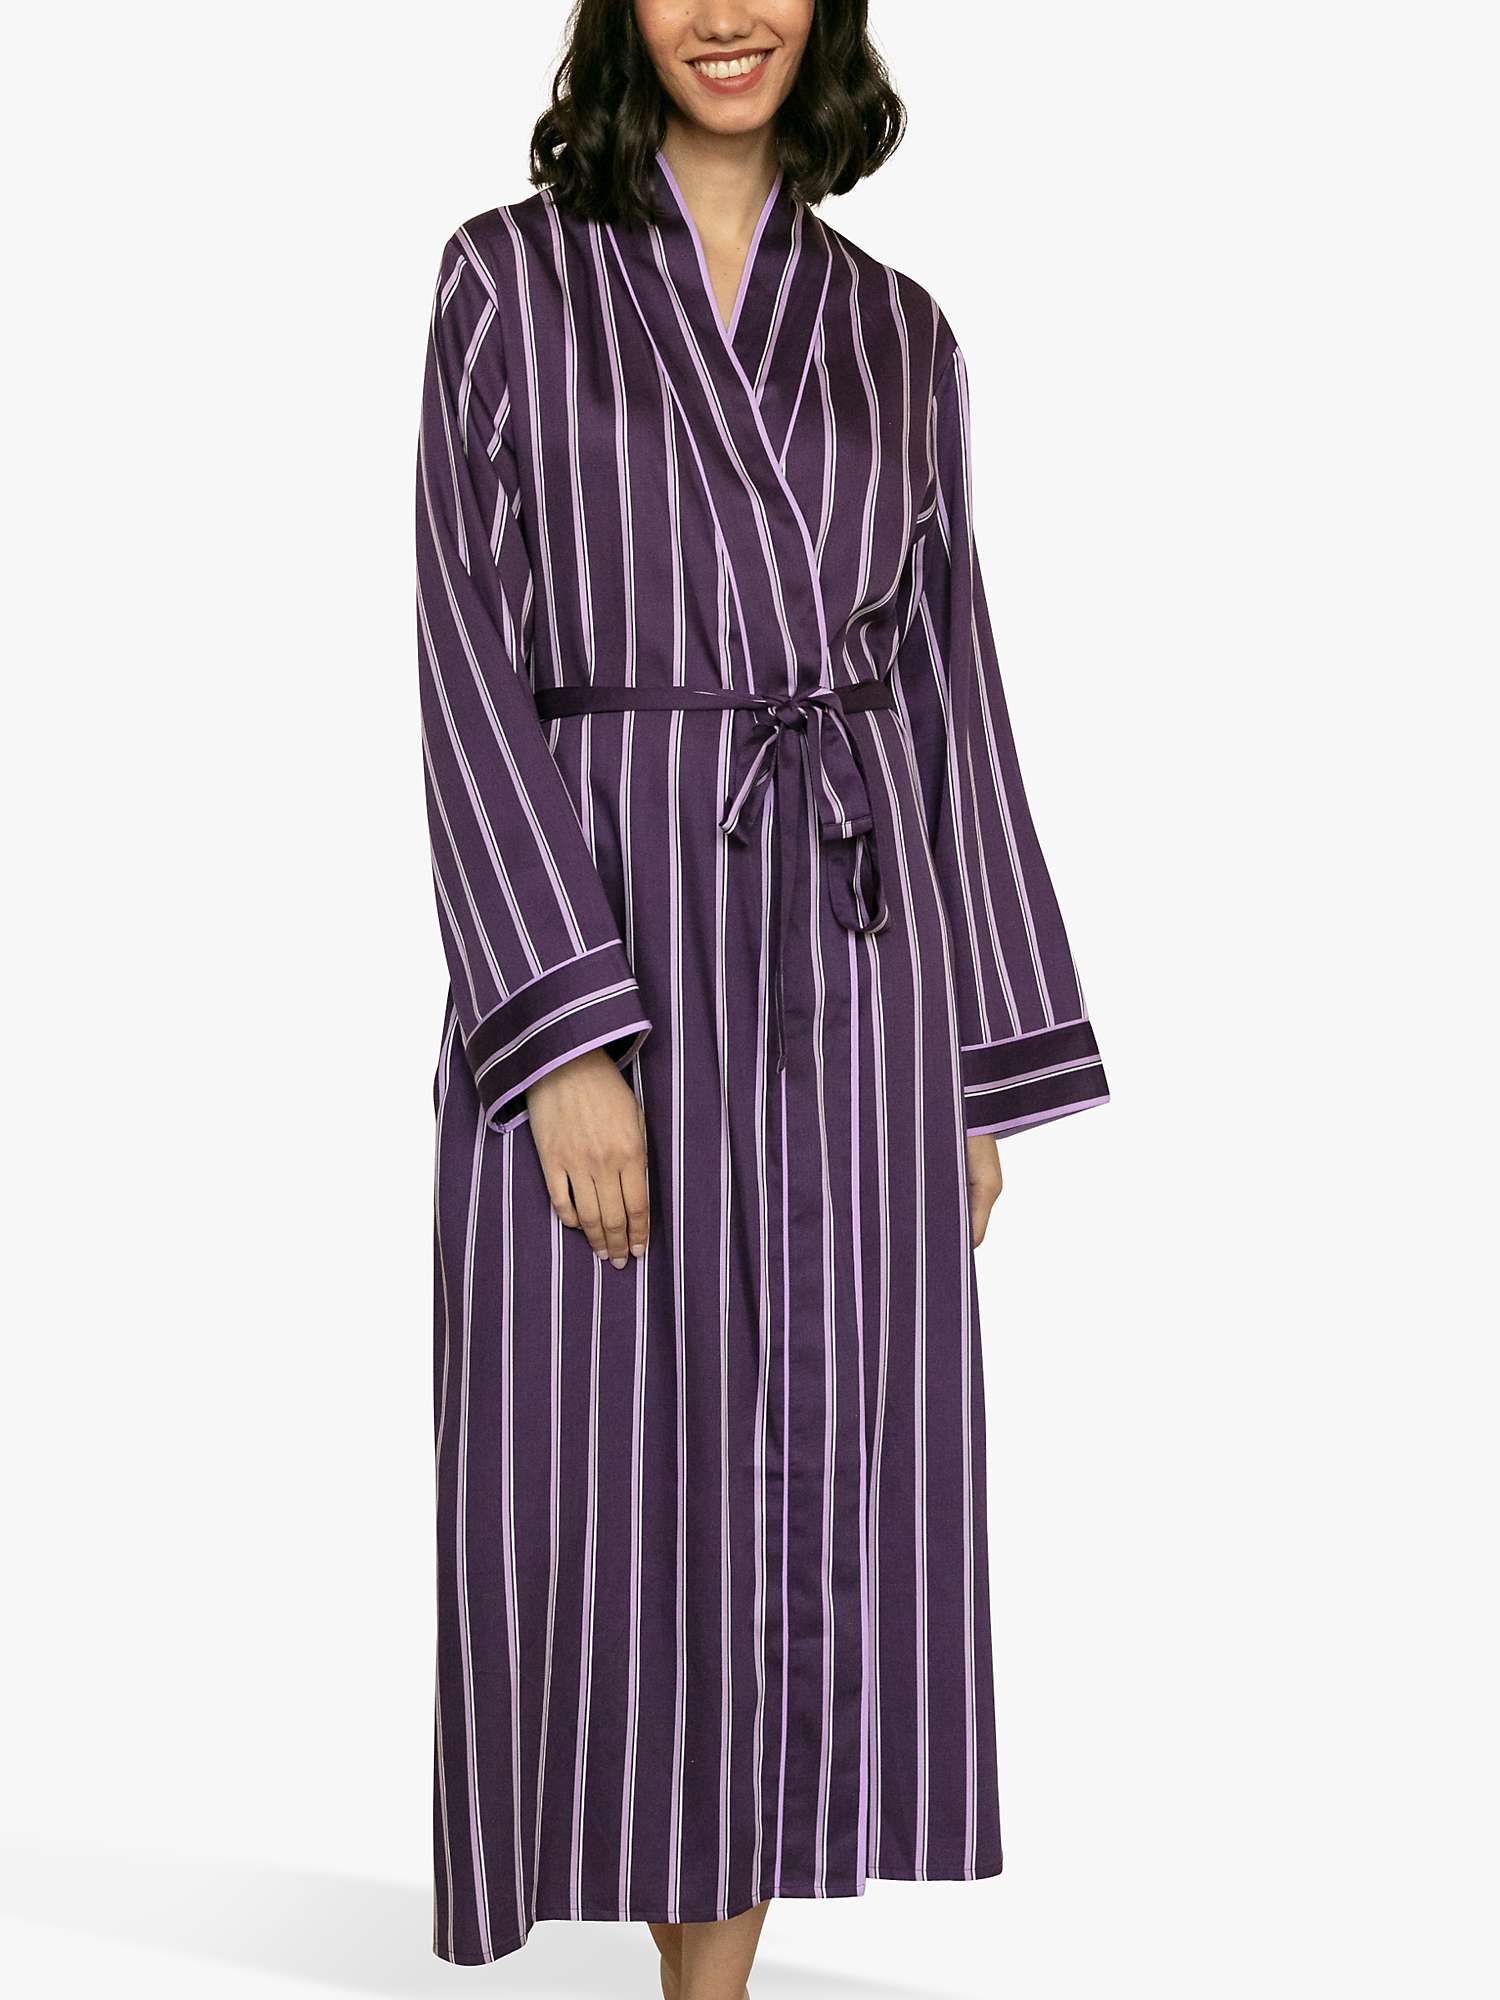 Buy Fable & Eve Stripe Print Dressing Gown, Purple Online at johnlewis.com